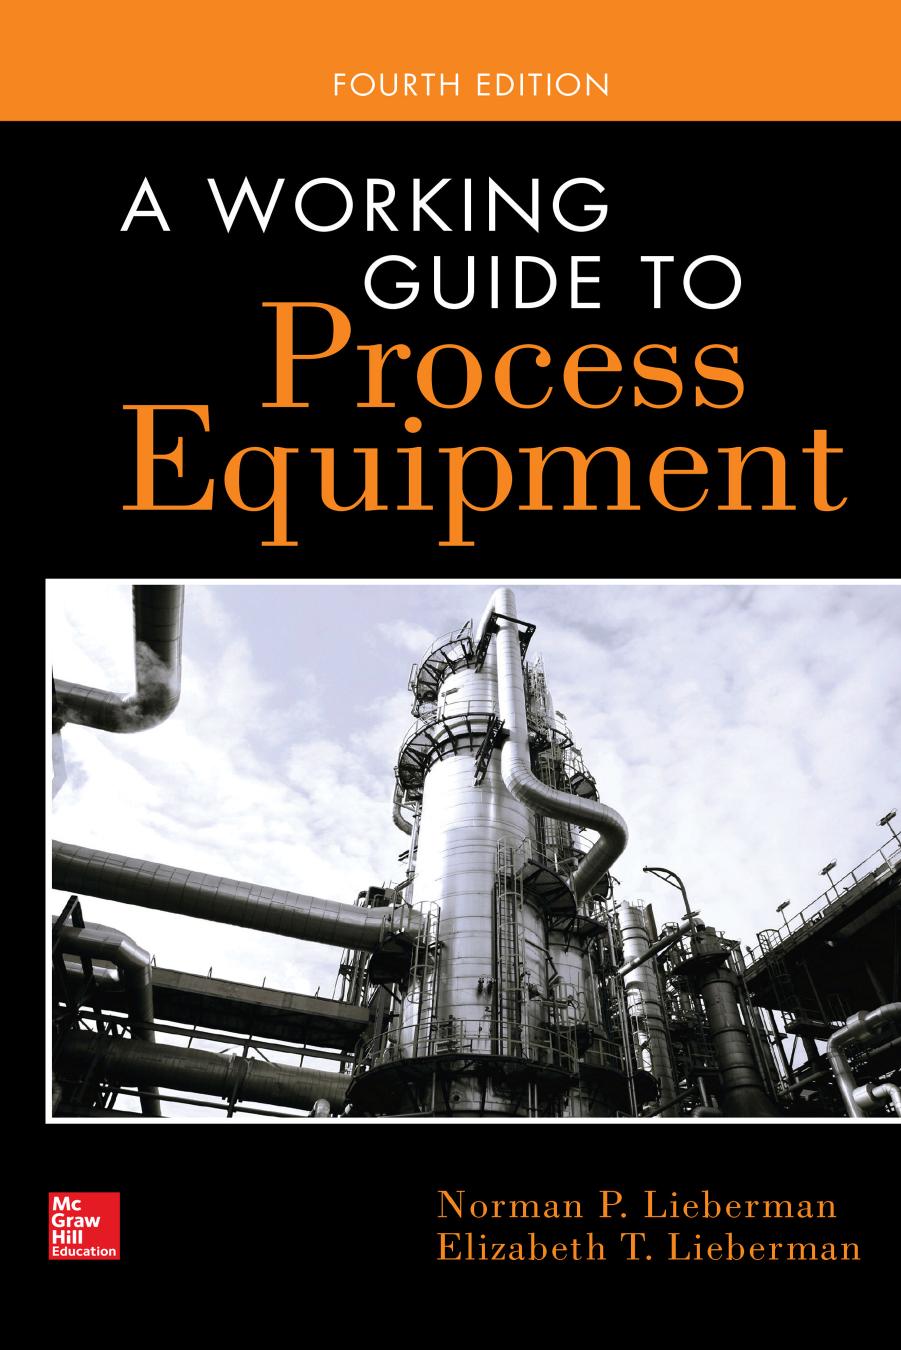 A Working Guide to Process Equipment, 4th ed                                                                   2014